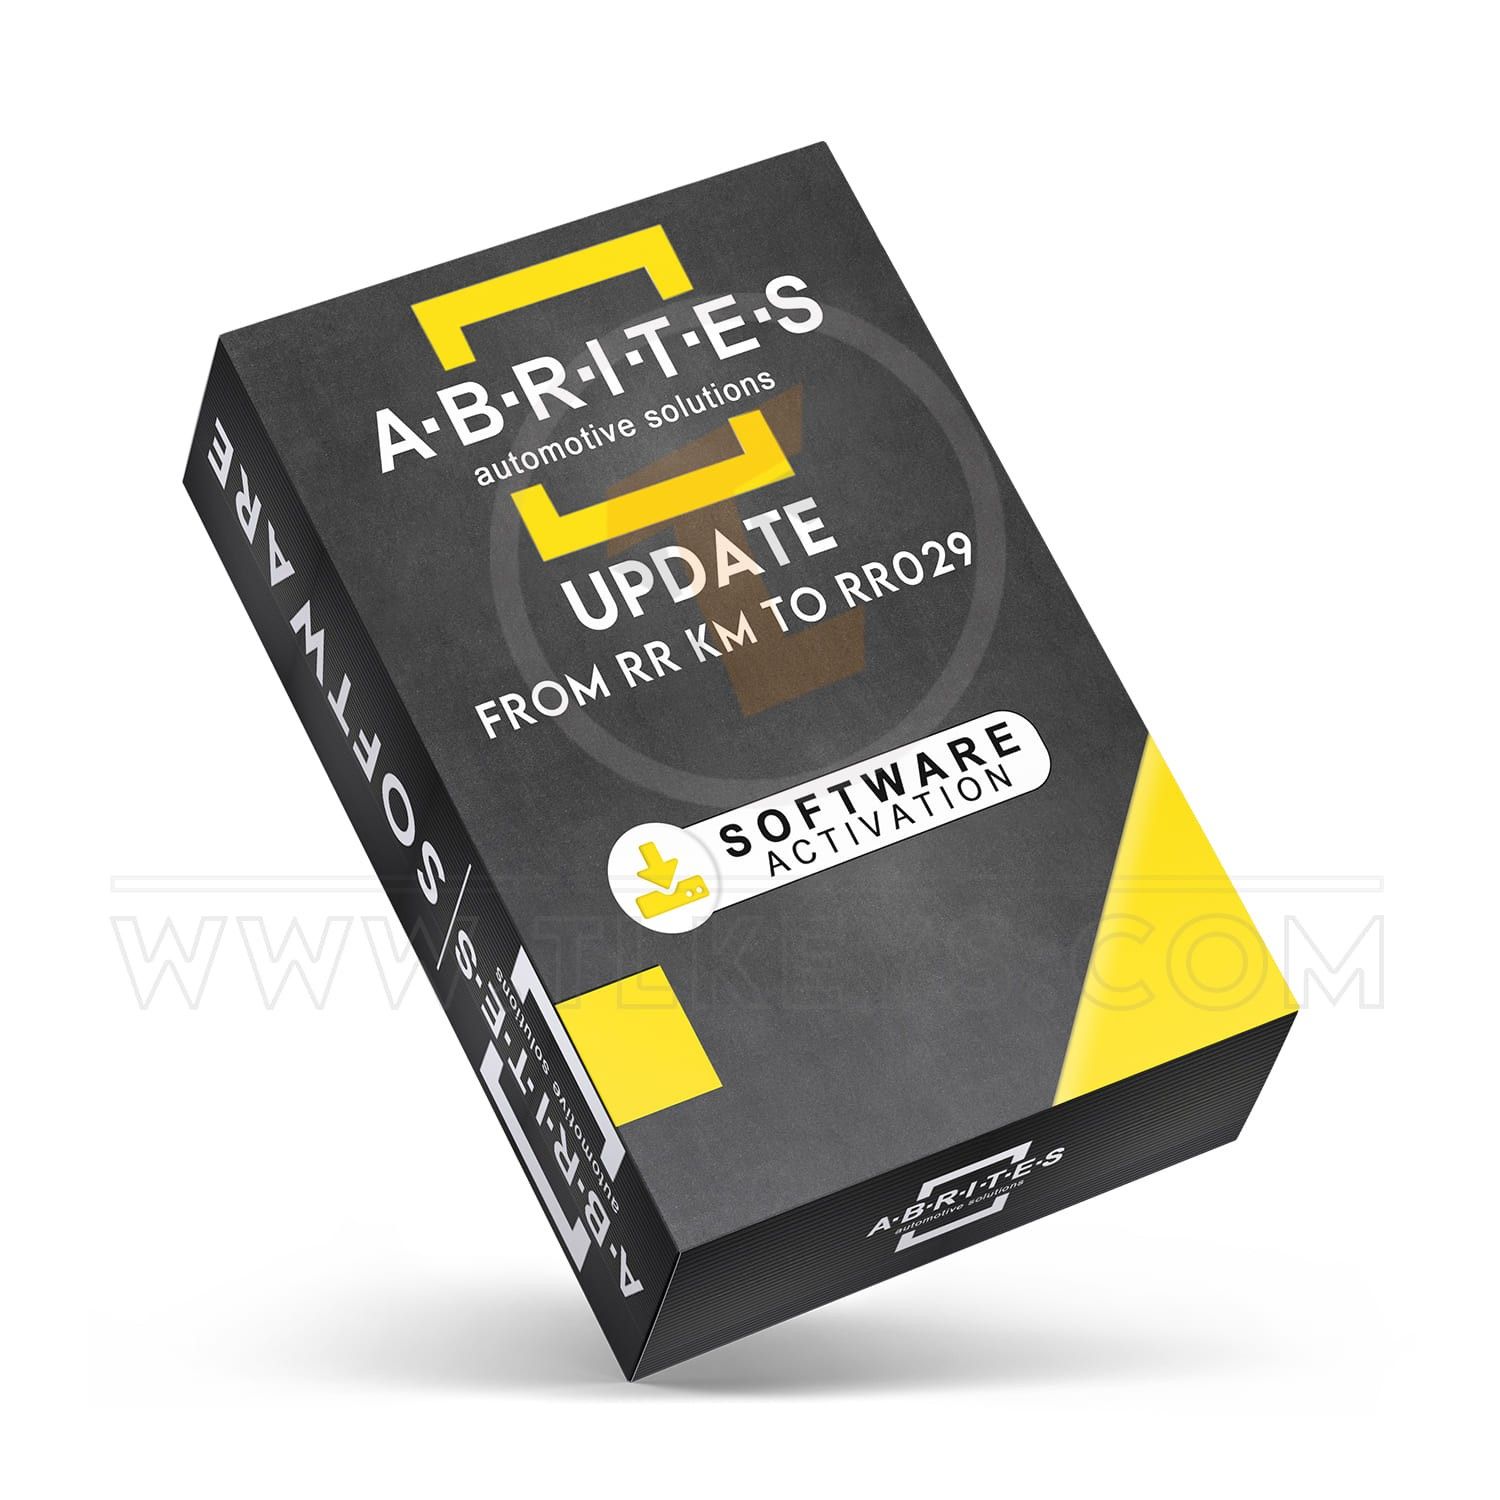 Abrites Software Update from RR KM to RR029 software